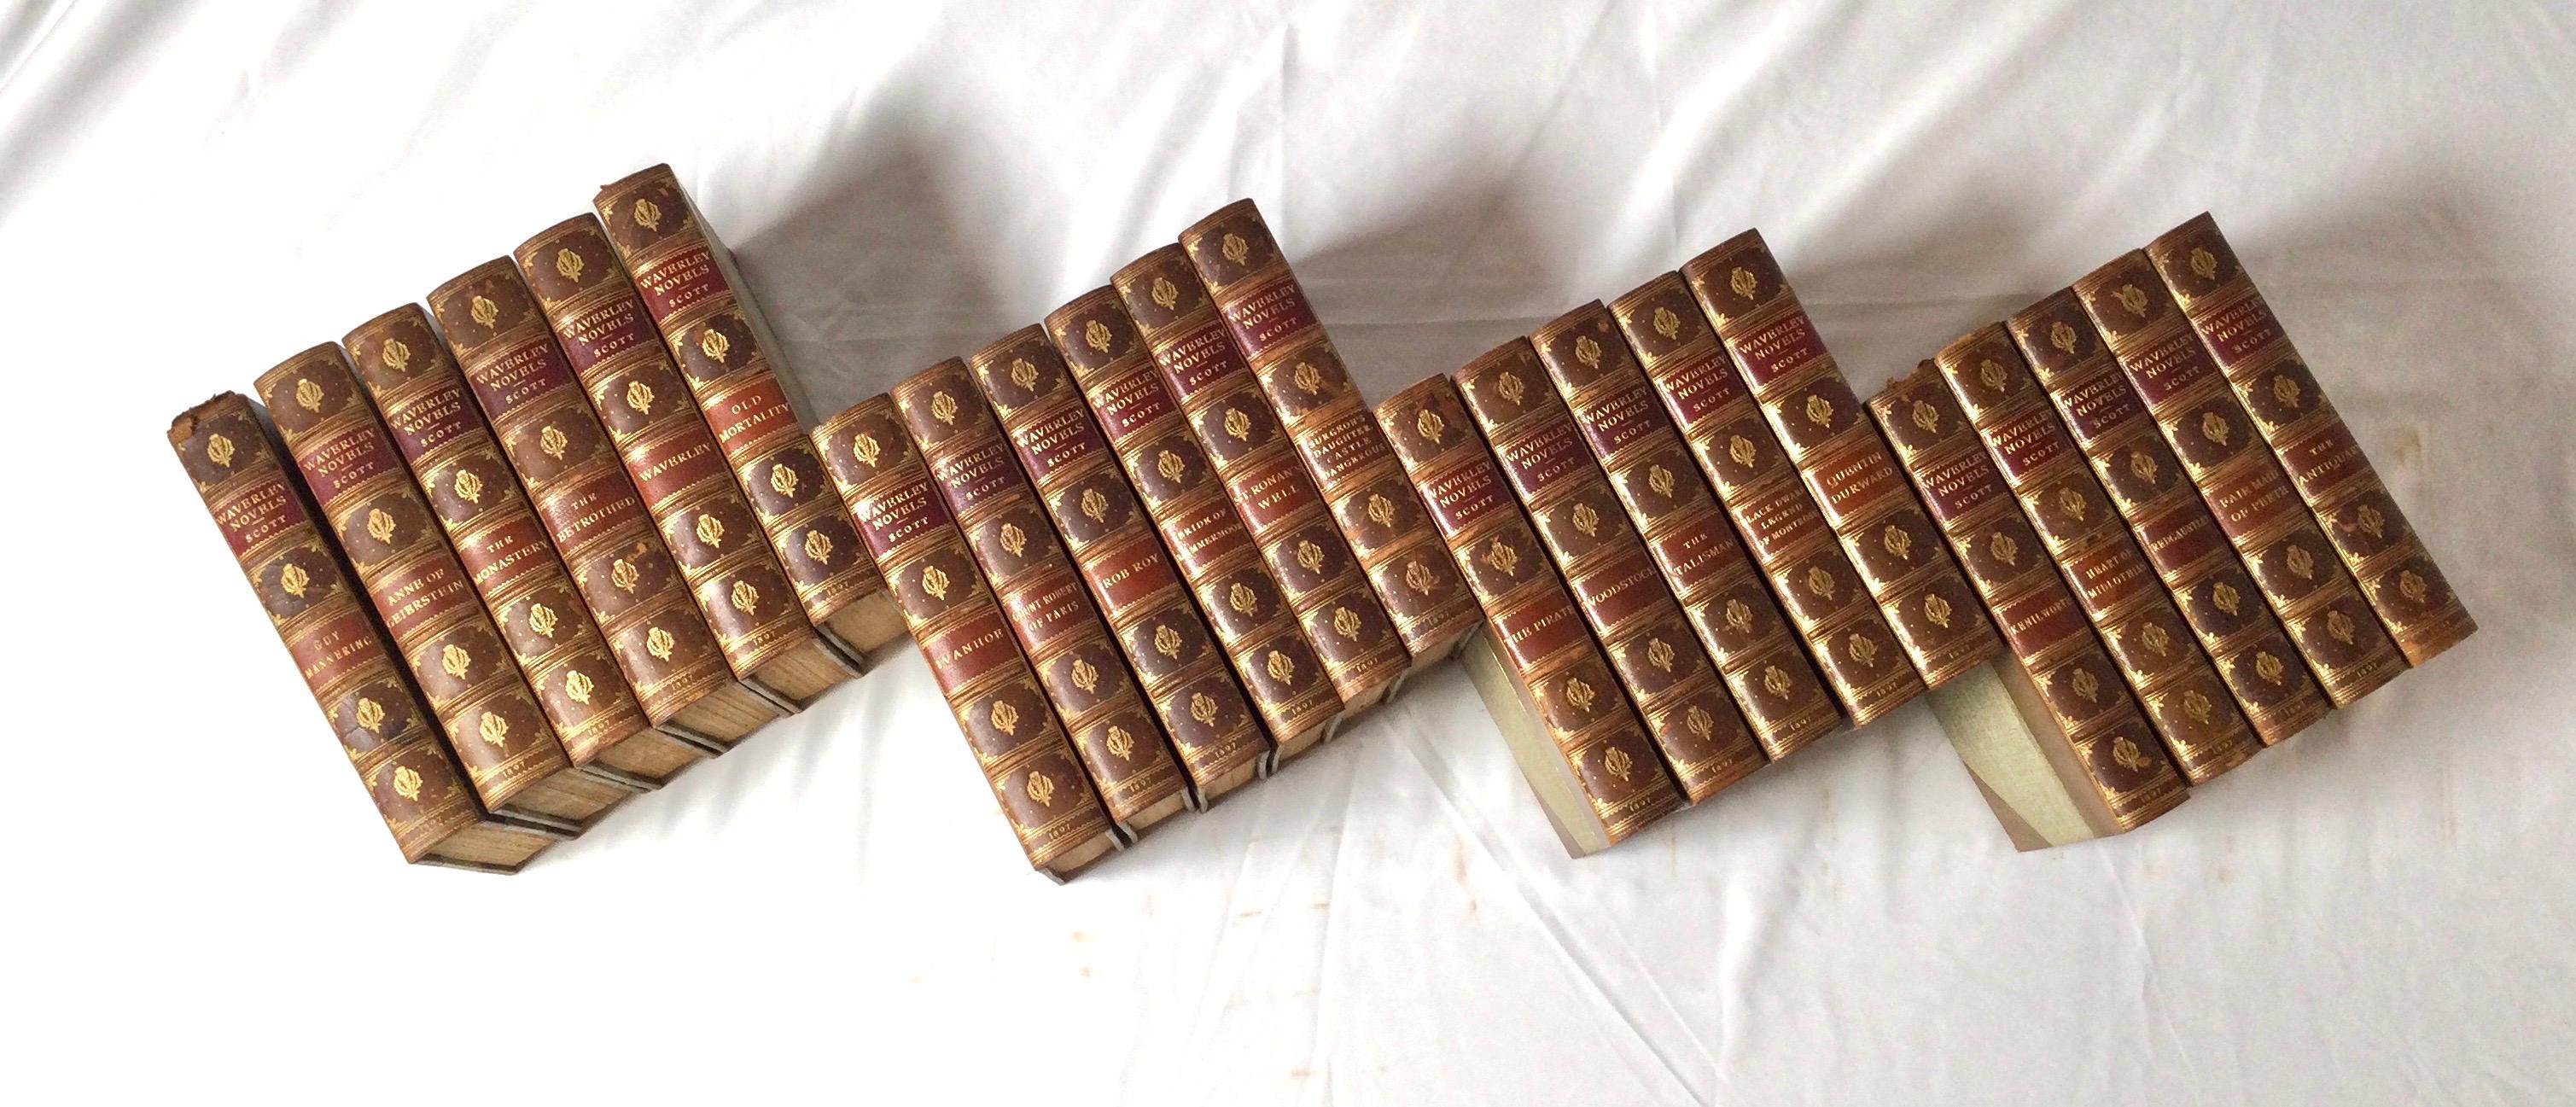 English Set of 22 Leather Bound Books, The Waverly Novels by Sir Walter Scott